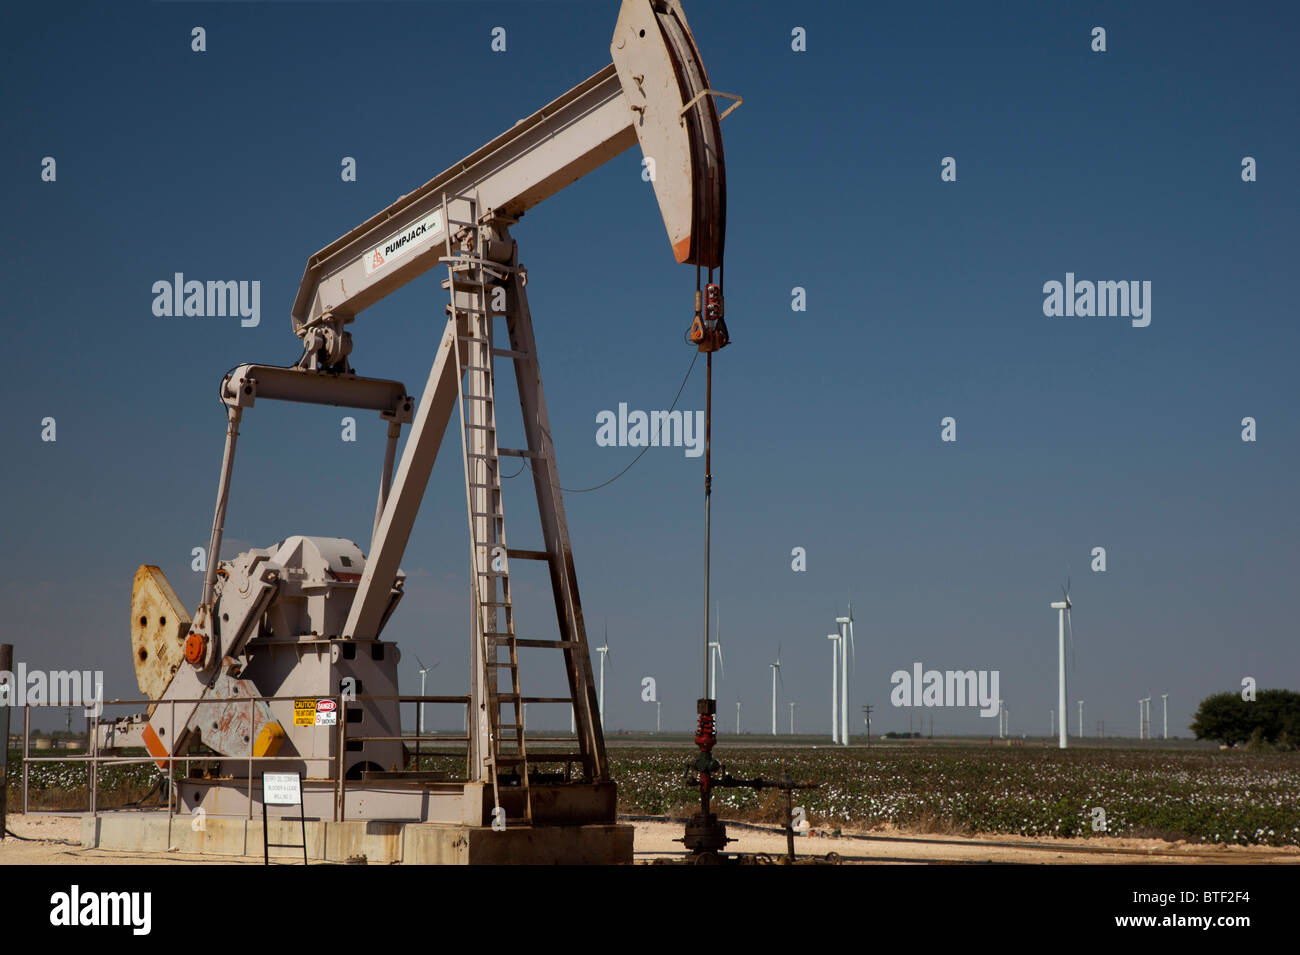 Stanton, Texas - An oil well and wind turbines in west Texas. Stock Photo